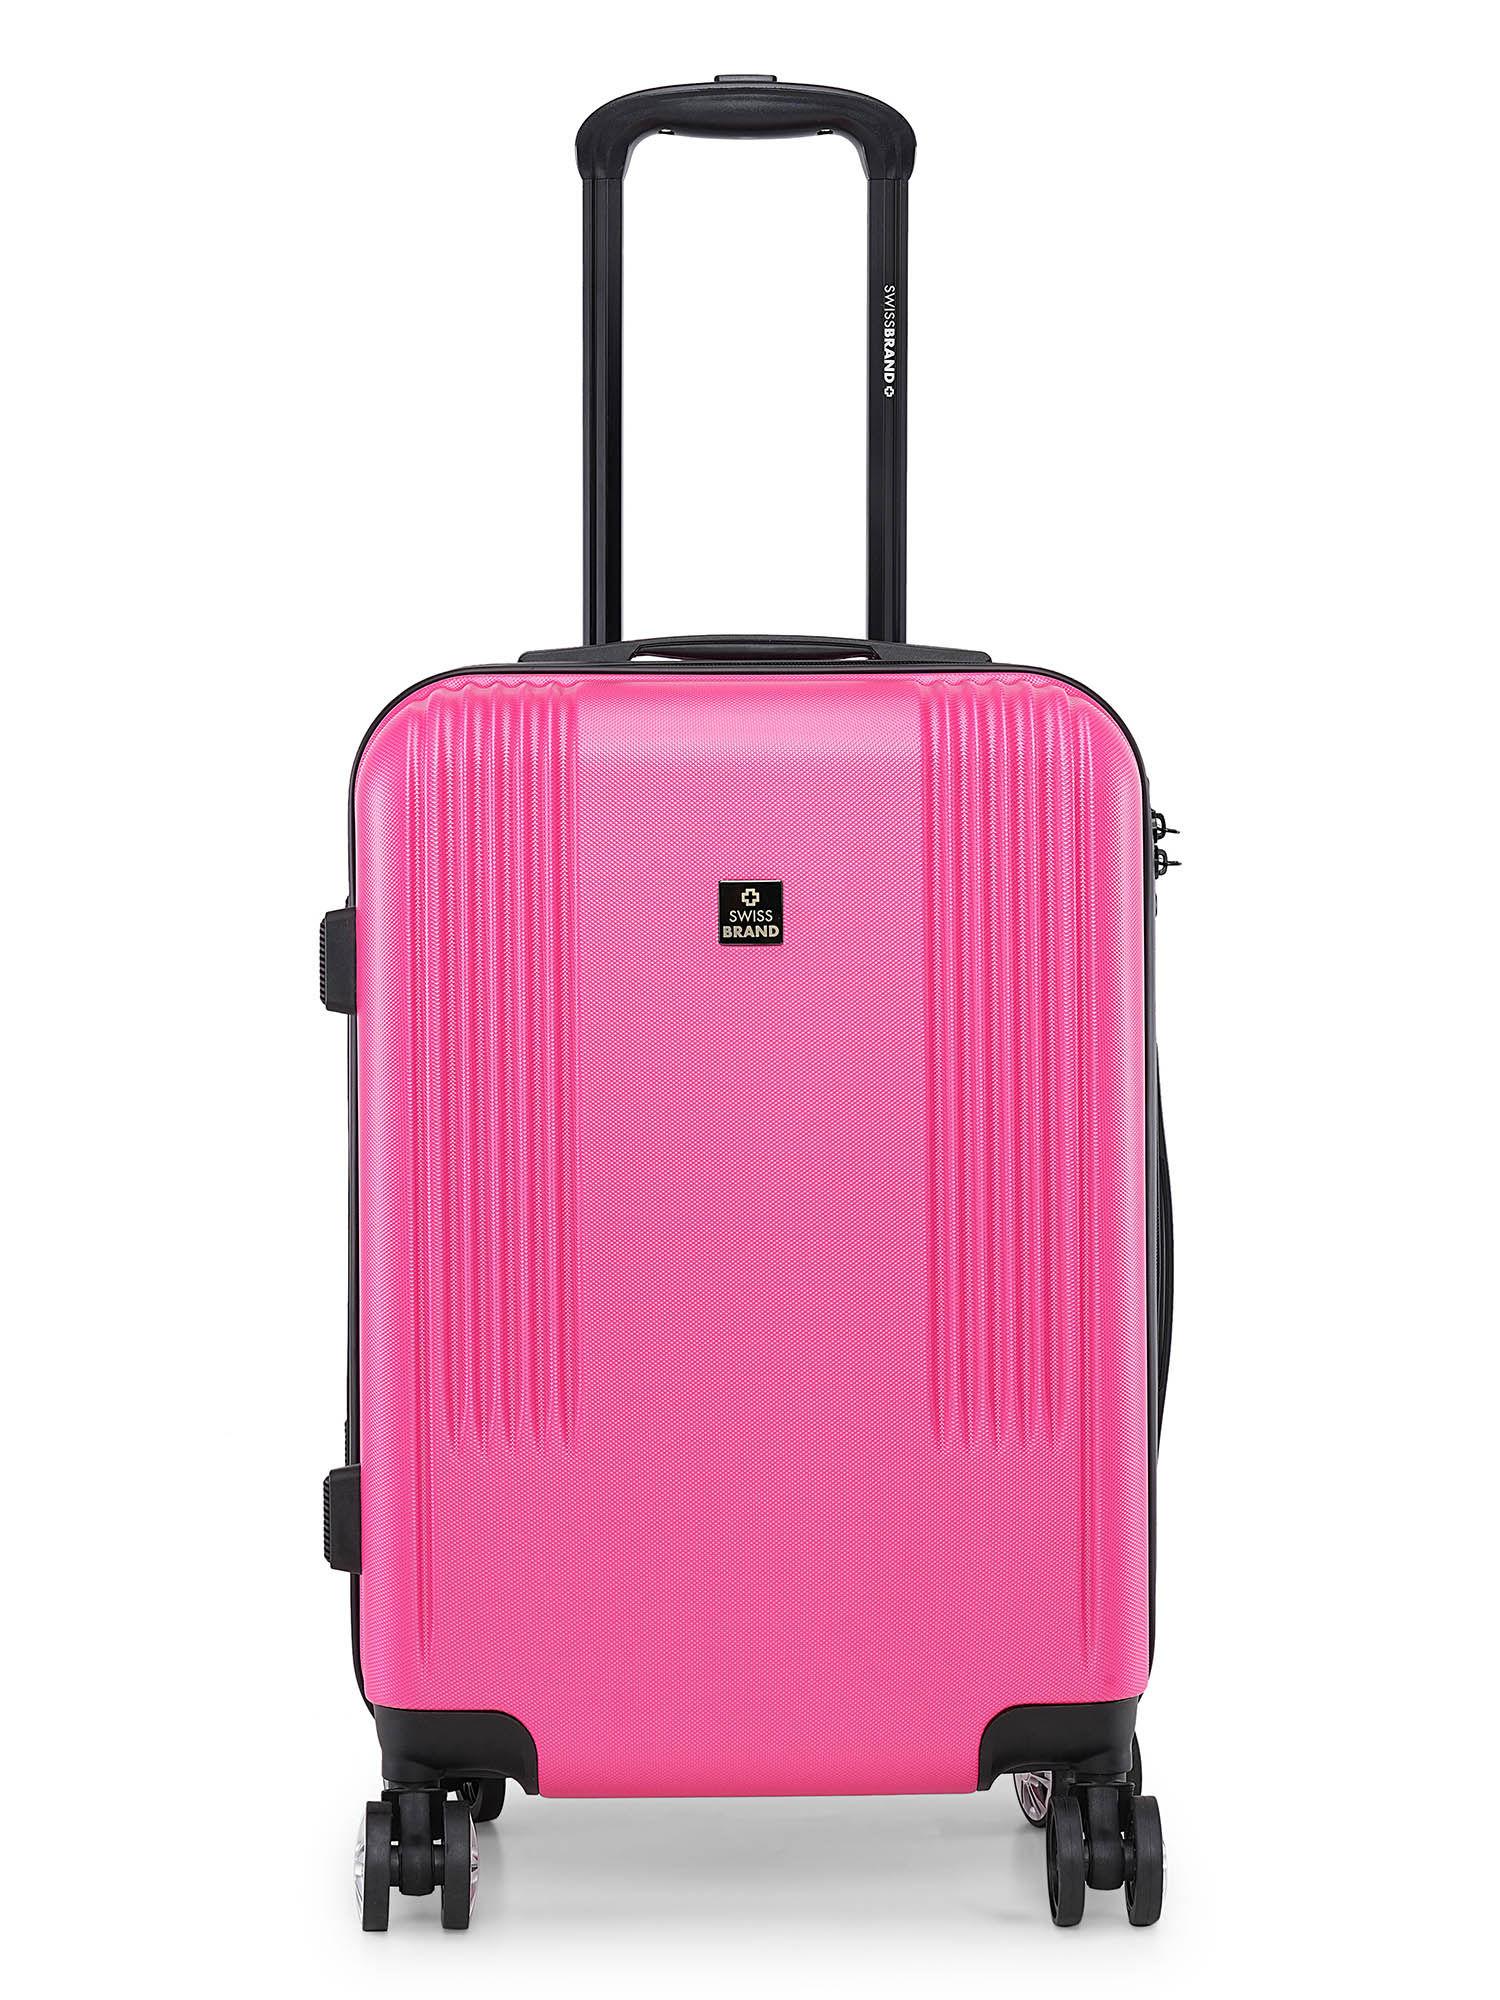 sion 2.0 rose pink color abs hard cabin trolley